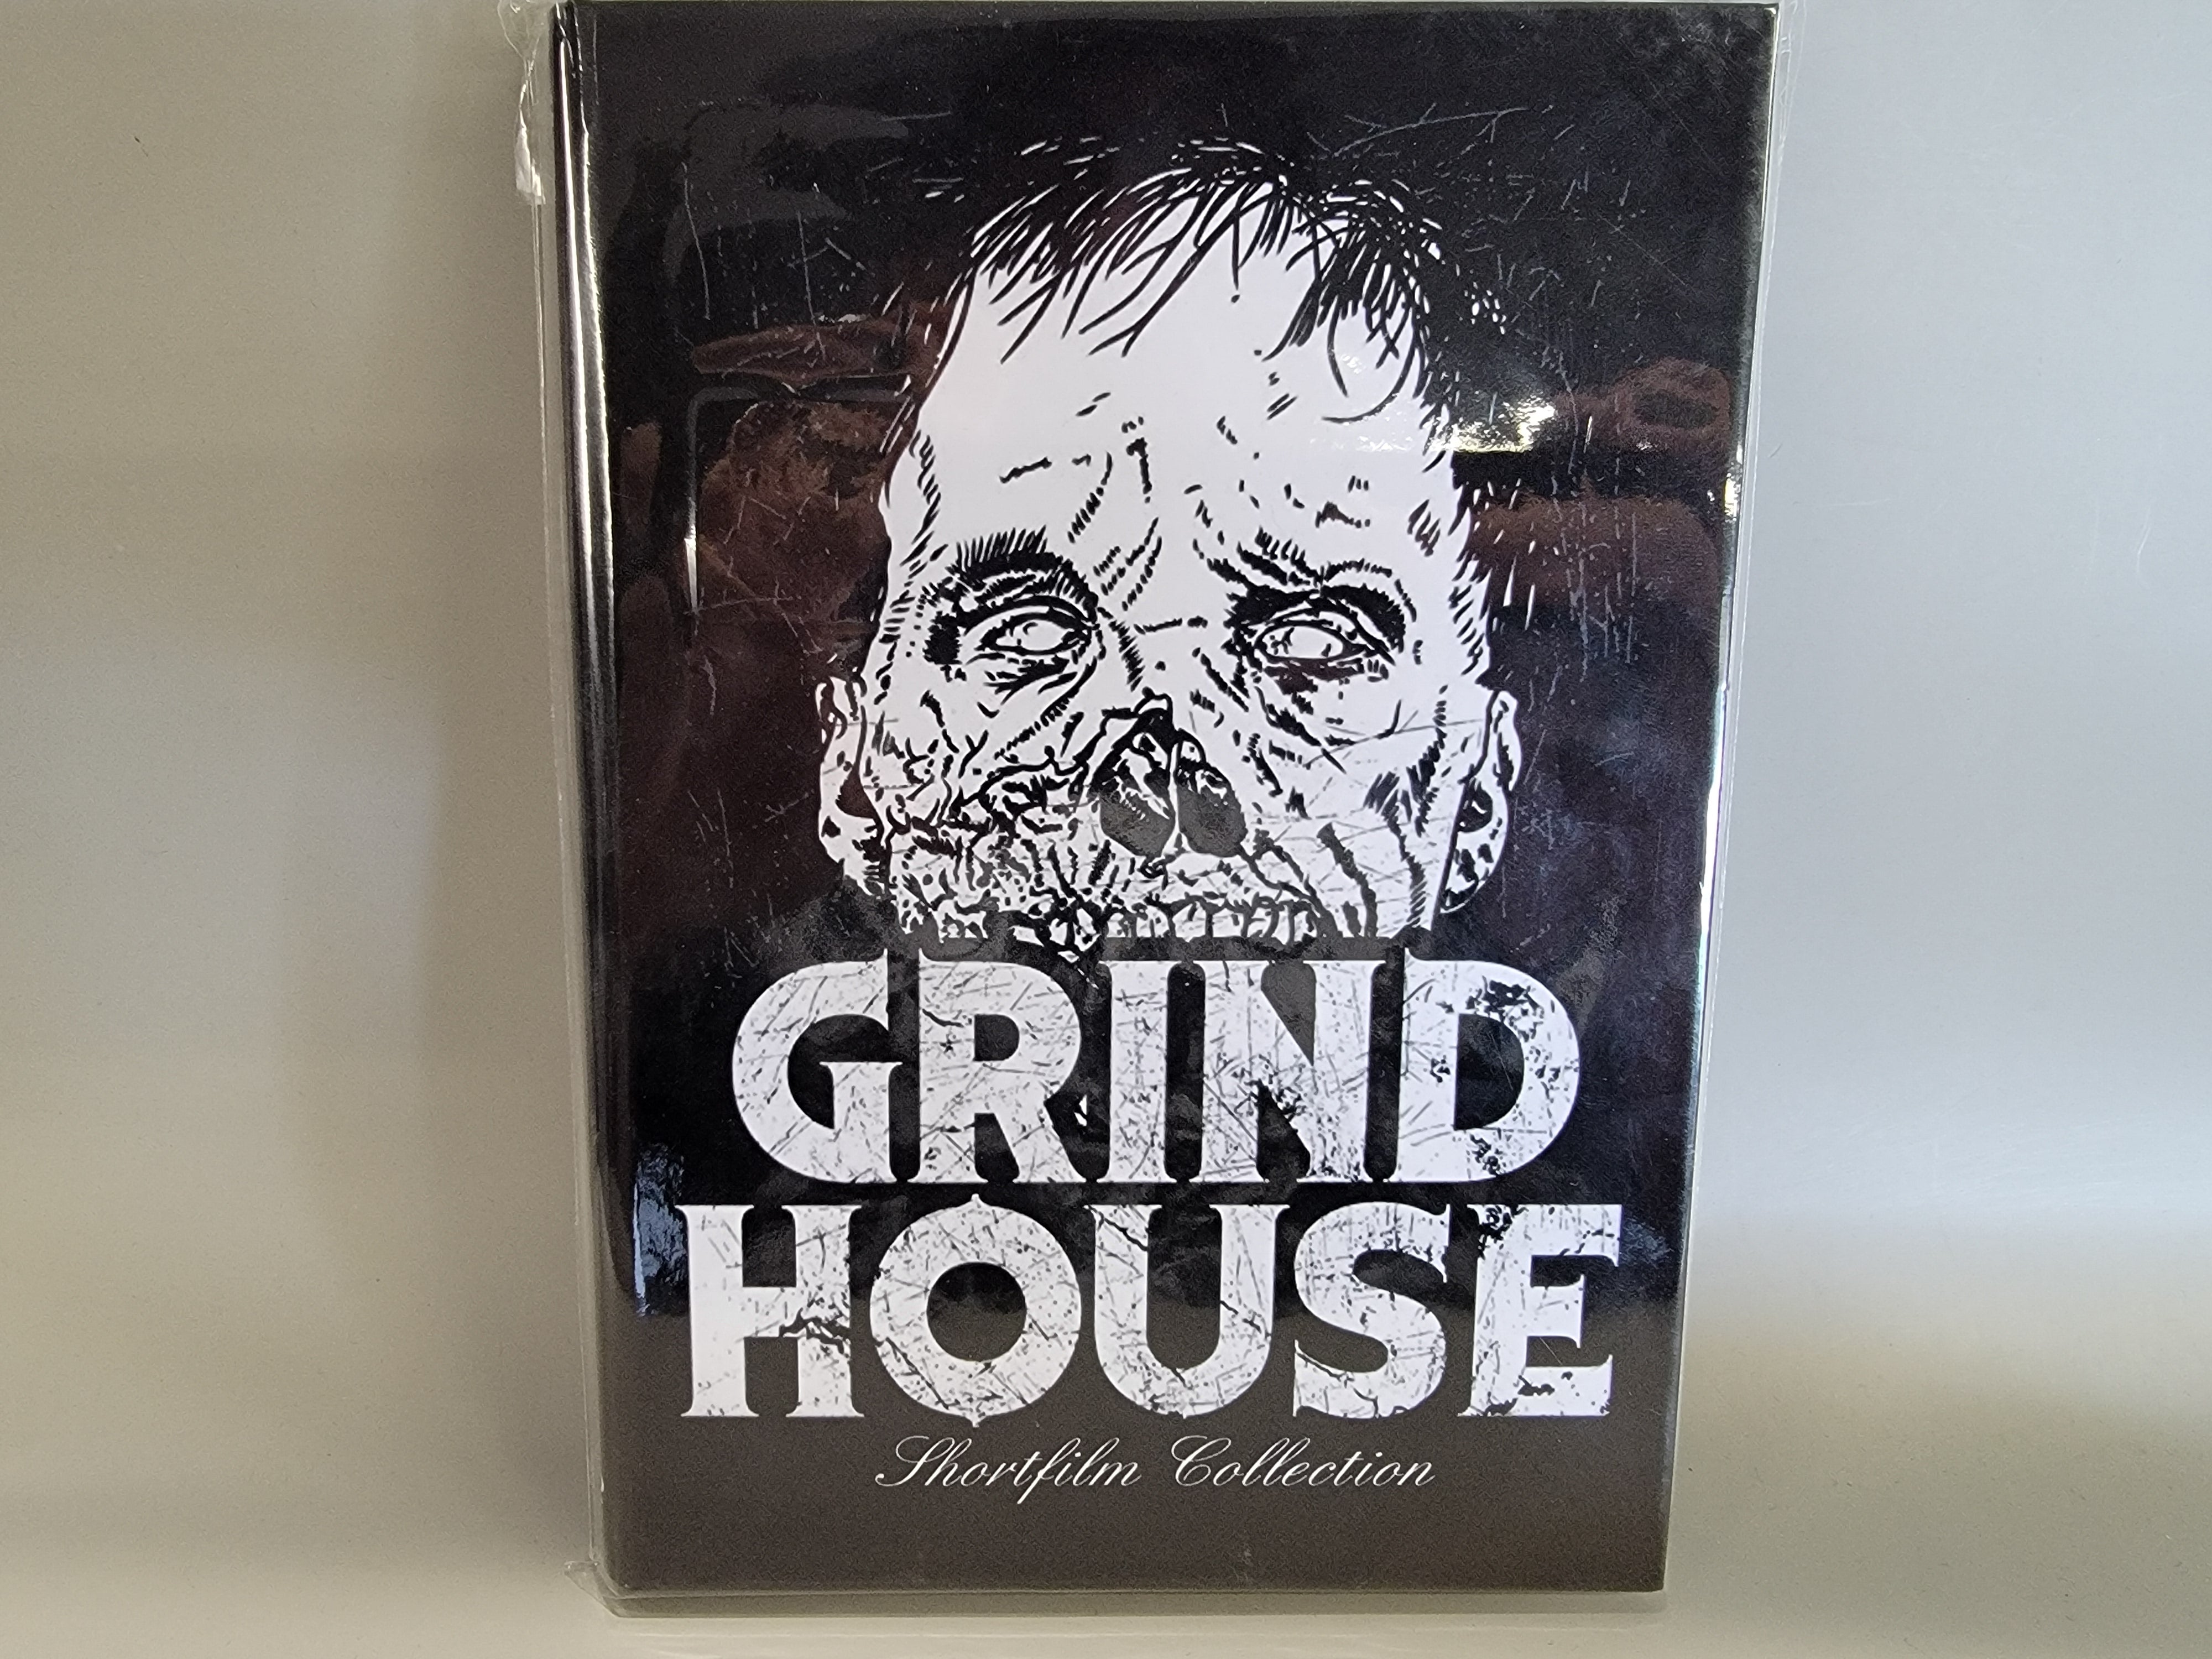 GRINDHOUSE SHORT FILM COLLECTION (LIMITED EDITION) DVD [USED]